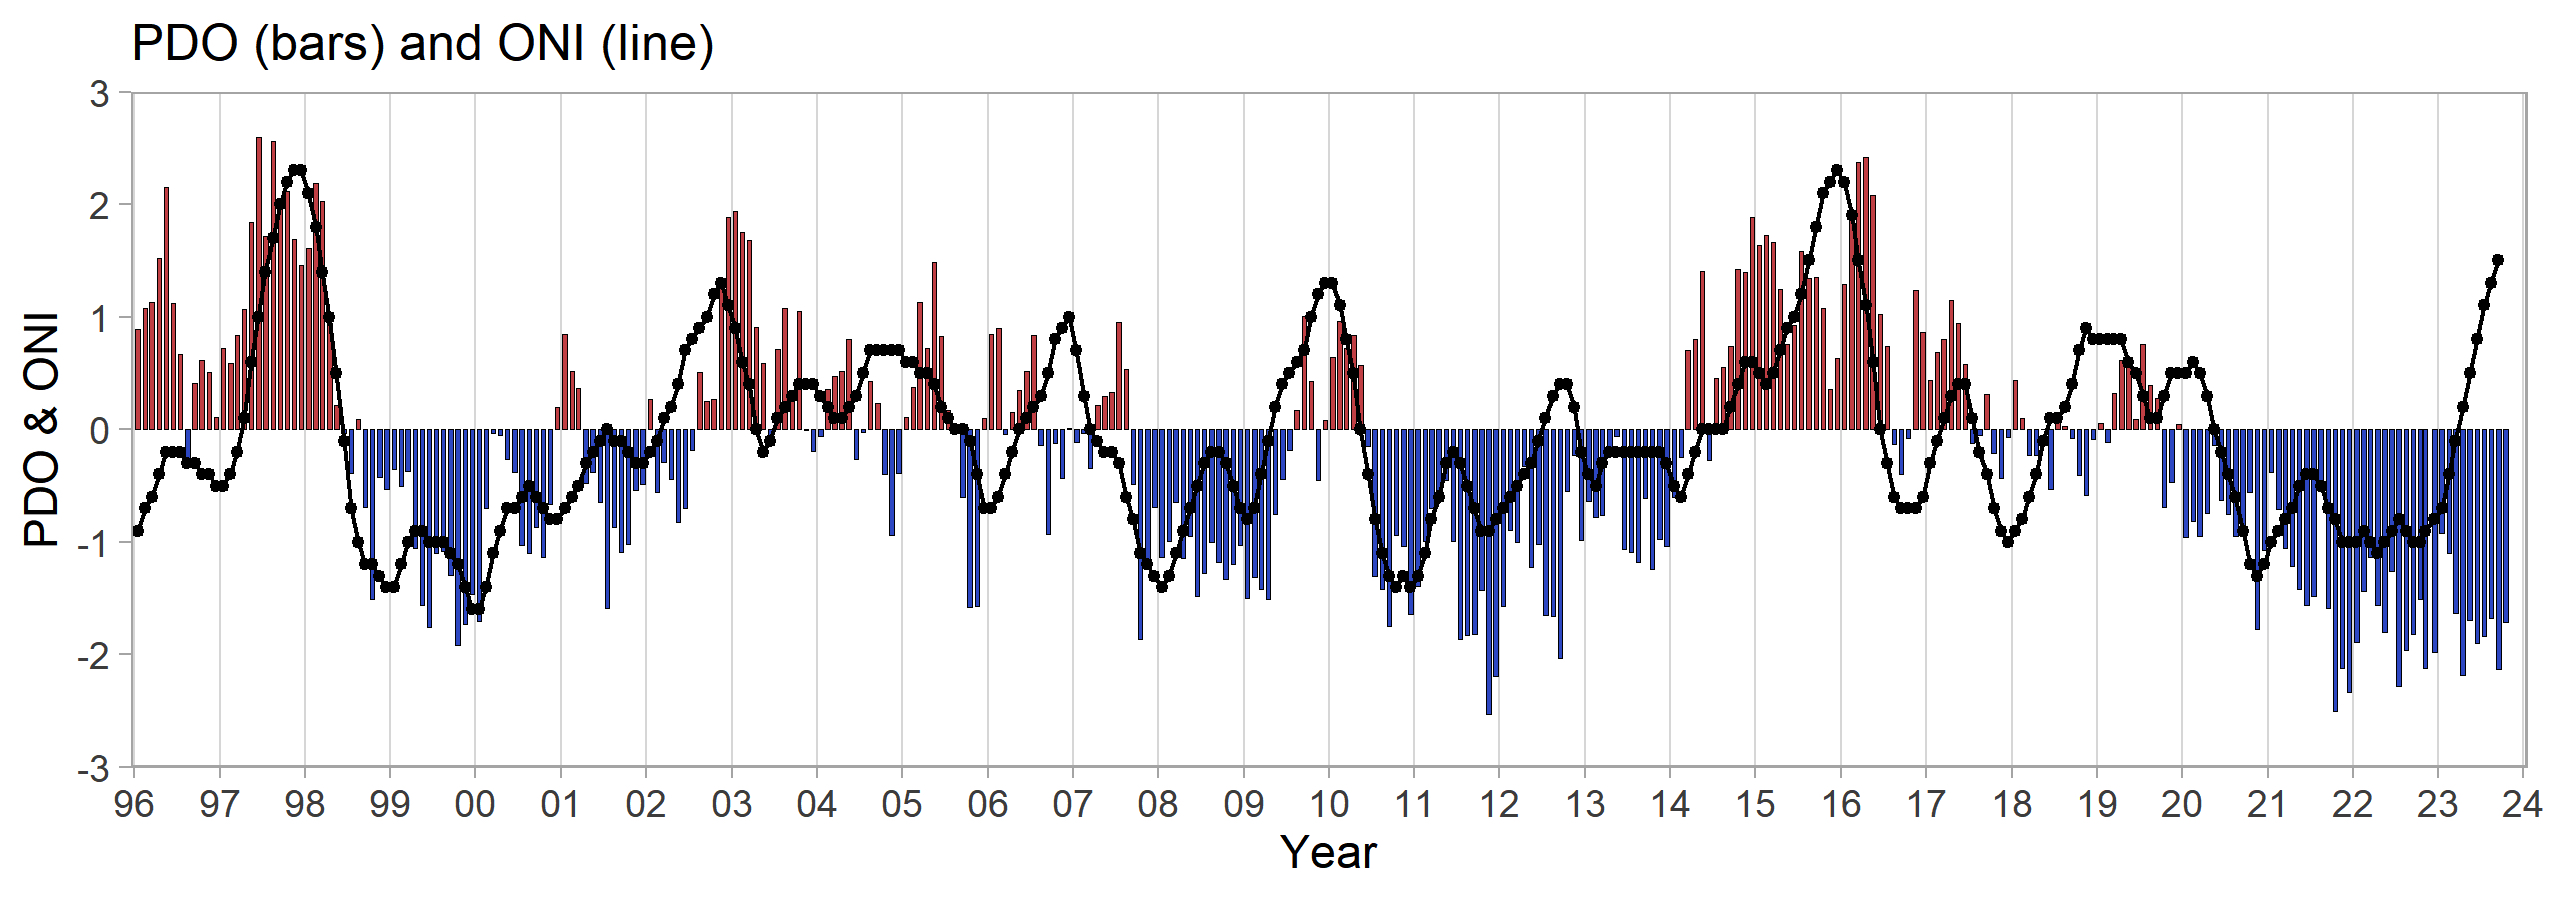 PDO and ONI from 1996 to 2024 showing Time series of shifts in sign of the Pacific Decadal Oscillation (PDO; bars) and the Ocean Niño Index (ONI; line) from 1996 to present. Red bars indicate positive (warm) years; blue bars negative (cool) years. 